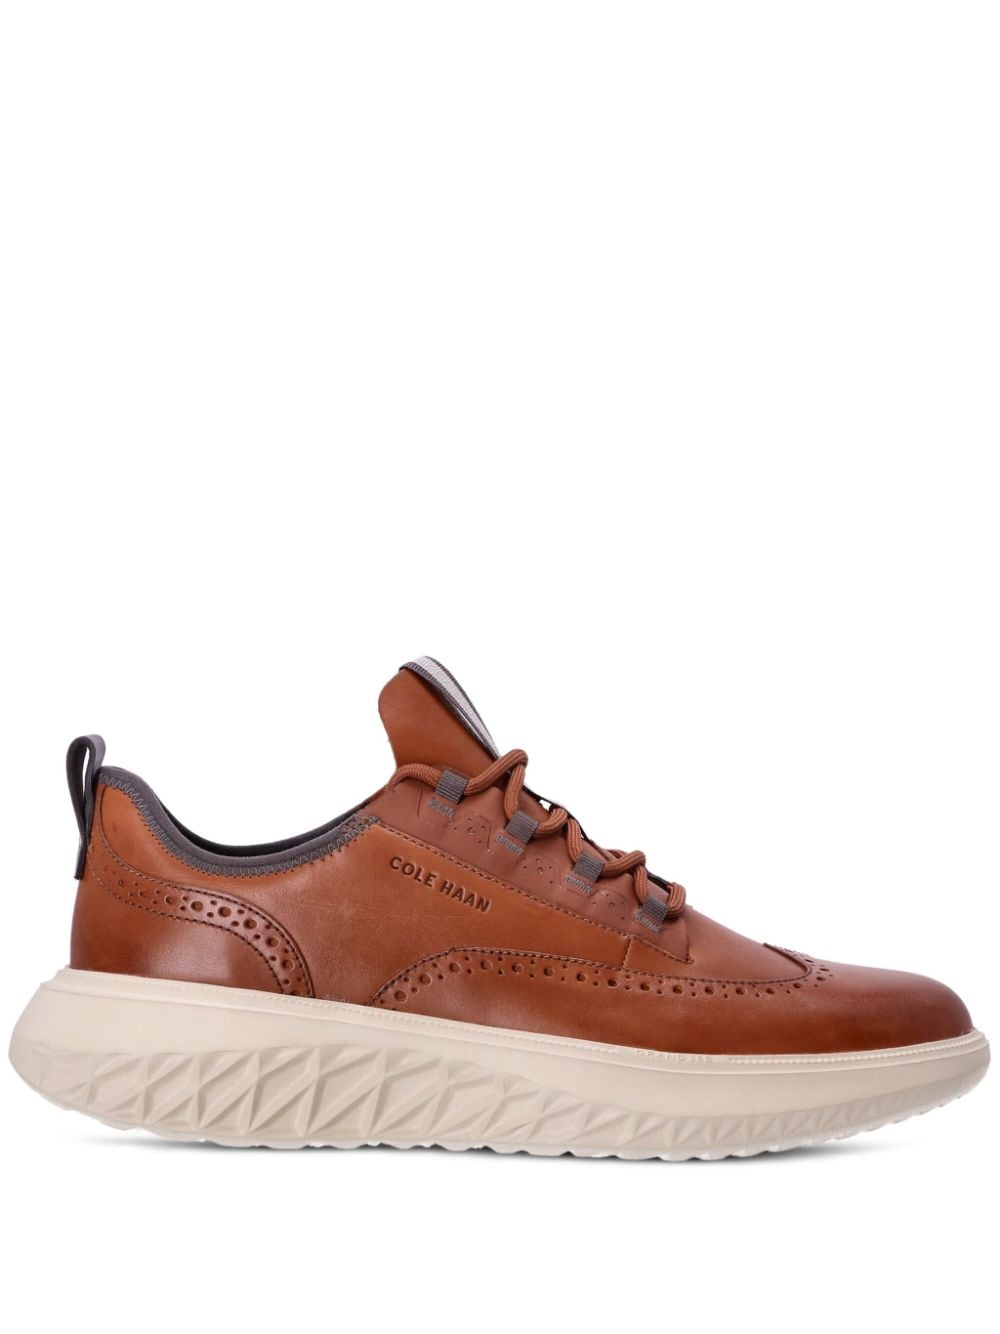 Cole Haan Zerogrand Leather Sneakers In Brown